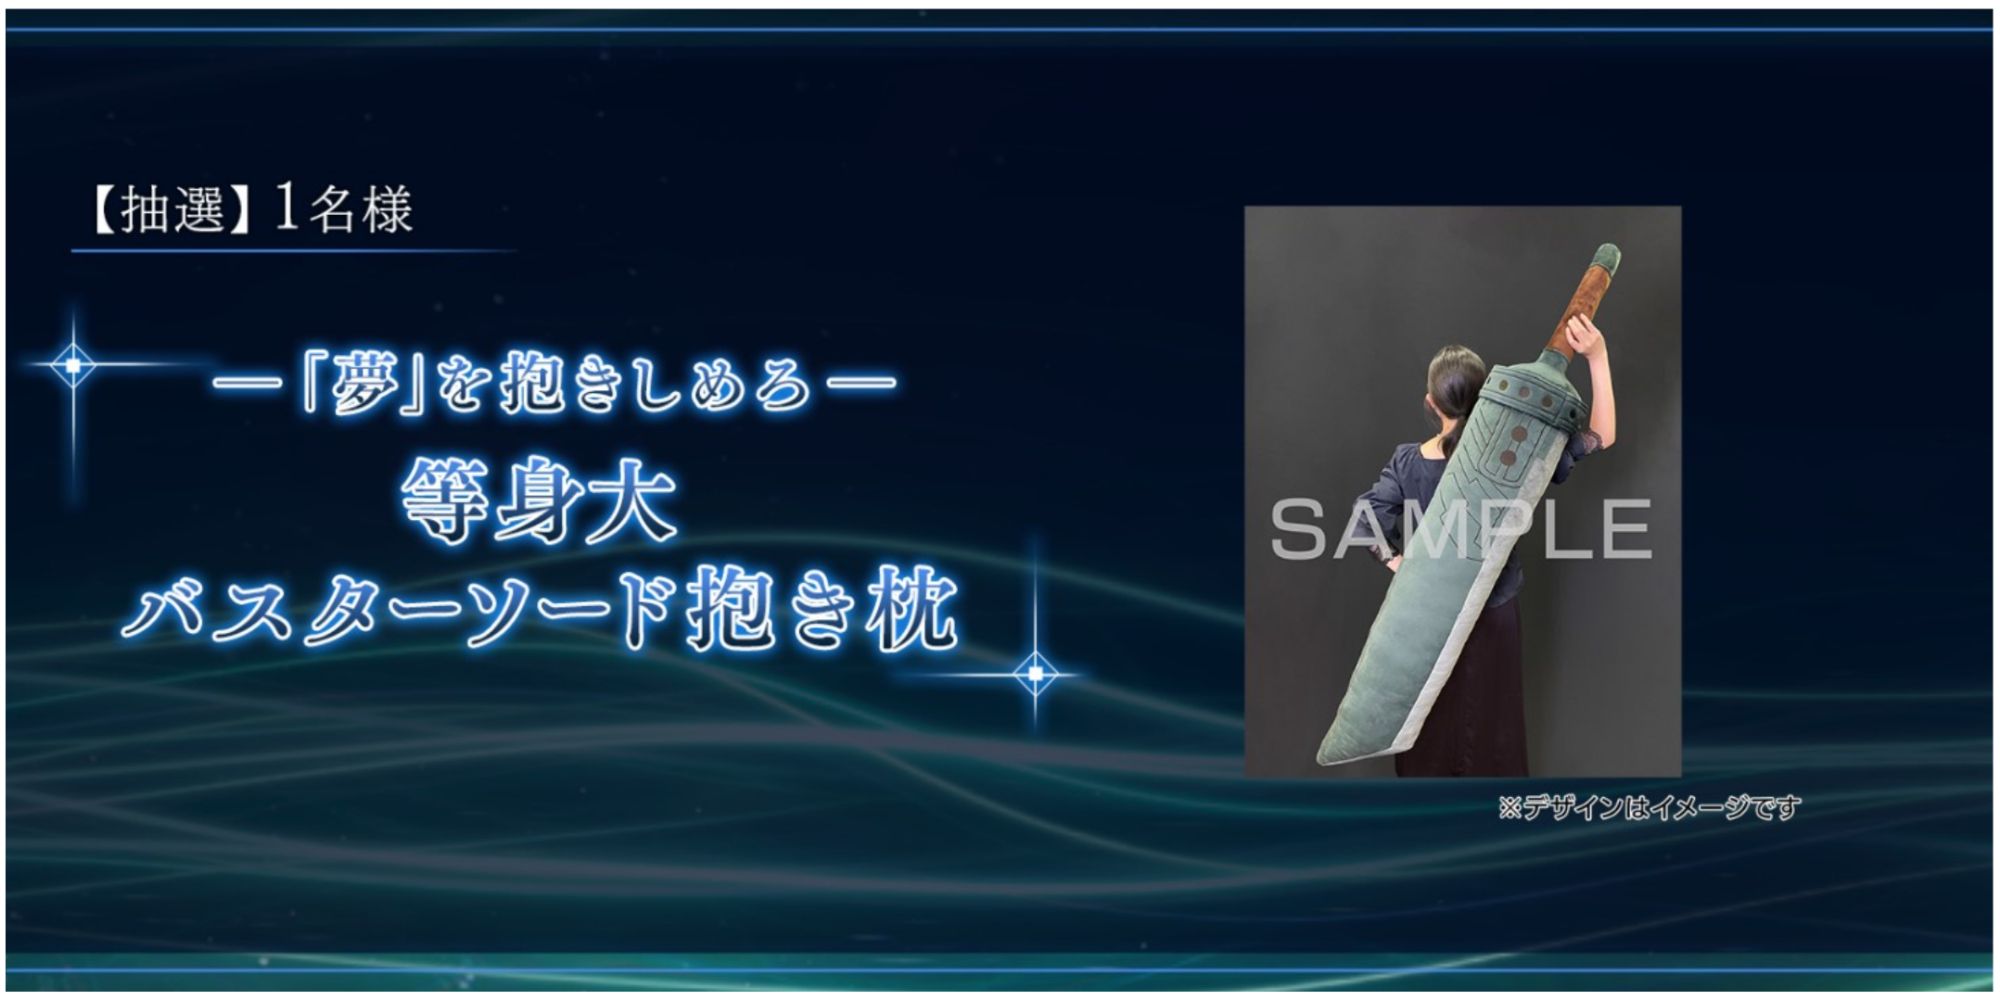 Image from Square-Enix's Crisis Core Final Fantasy VII Reunion site, showing the grand prize in the giveaway campaign, a life-sized plus Buster Sword